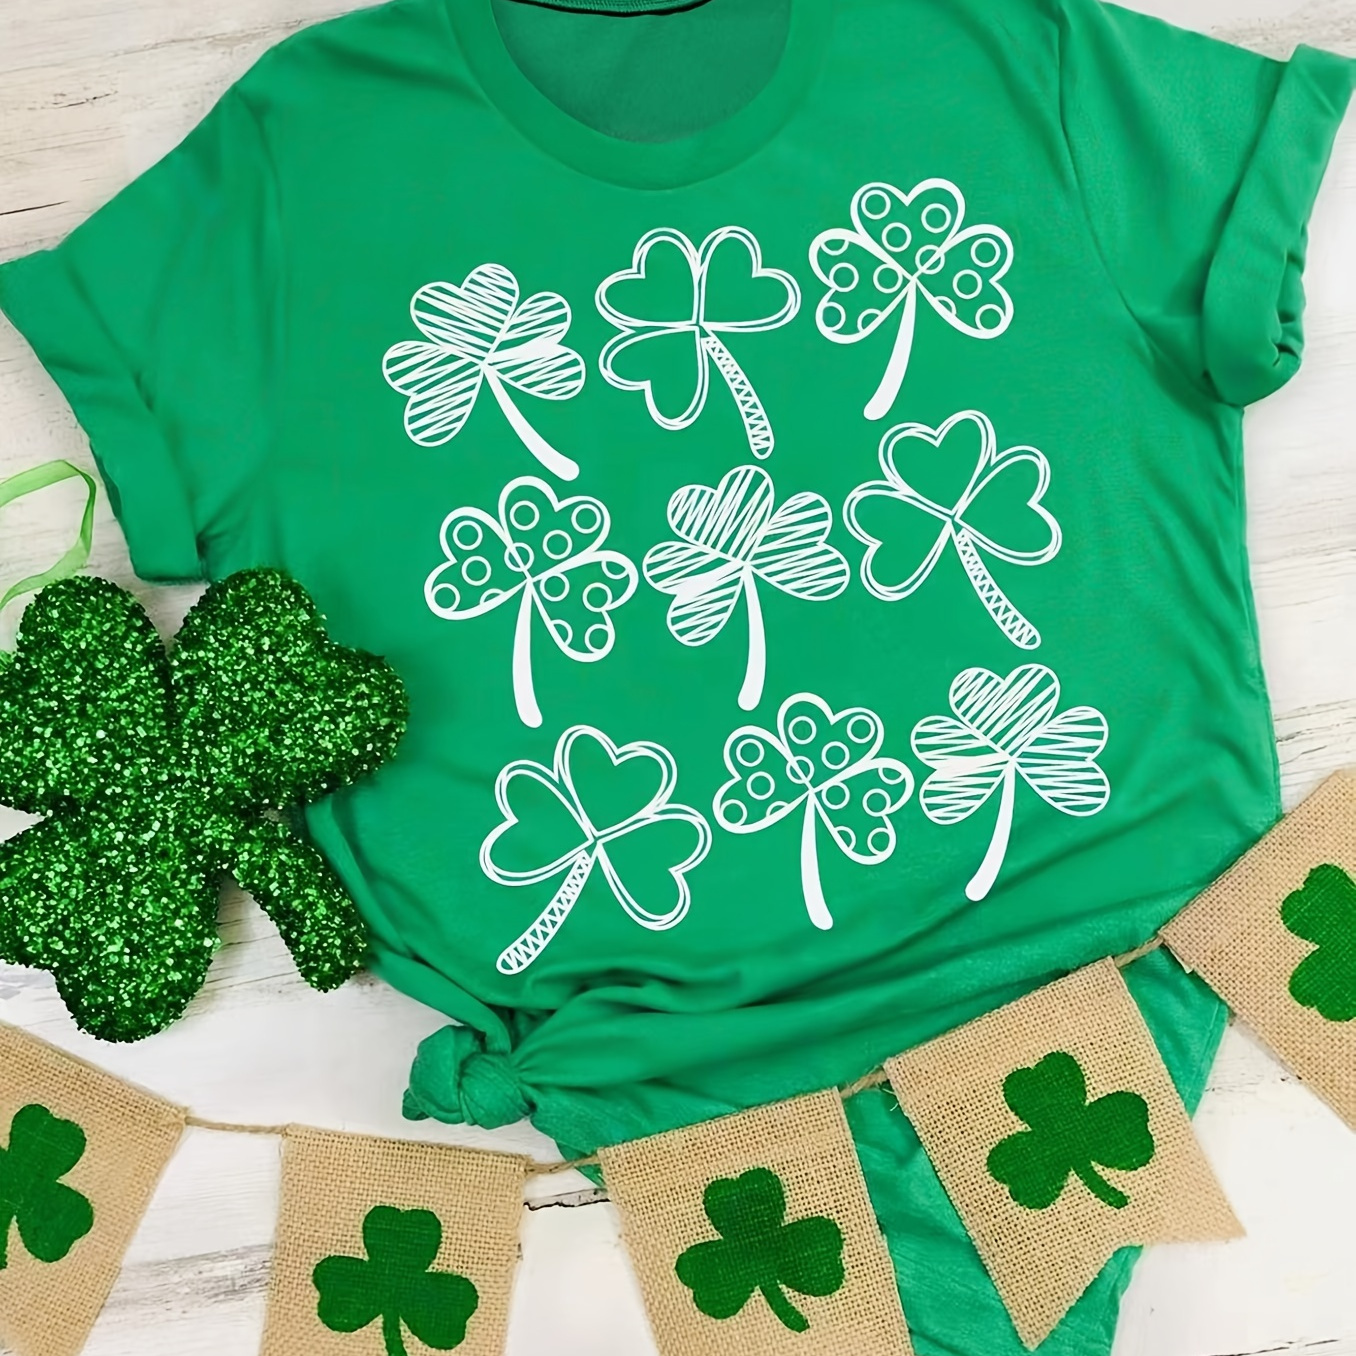 

St. Patrick's Day Four-leaf Clover Pprint T-shirt, Casual Crew Neck Short Sleeve Top For Spring & Summer, Women's Clothing